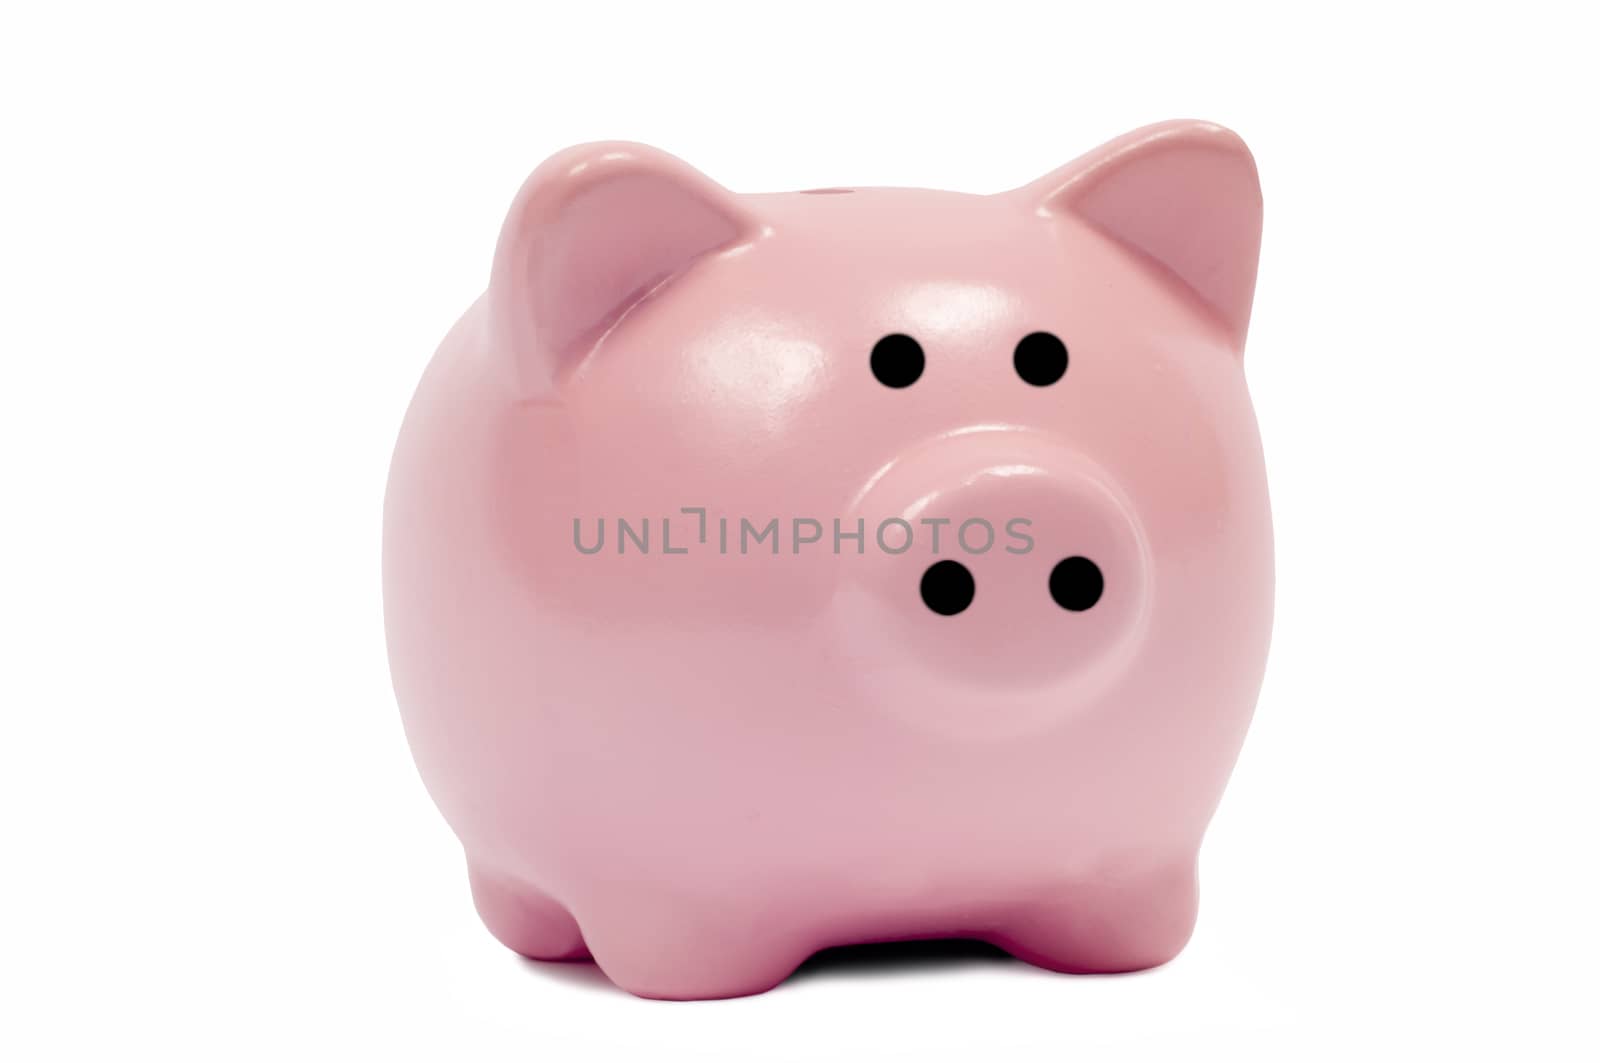 Close up shot of a small pink piggy bank isolated on white background.  Looking forward.